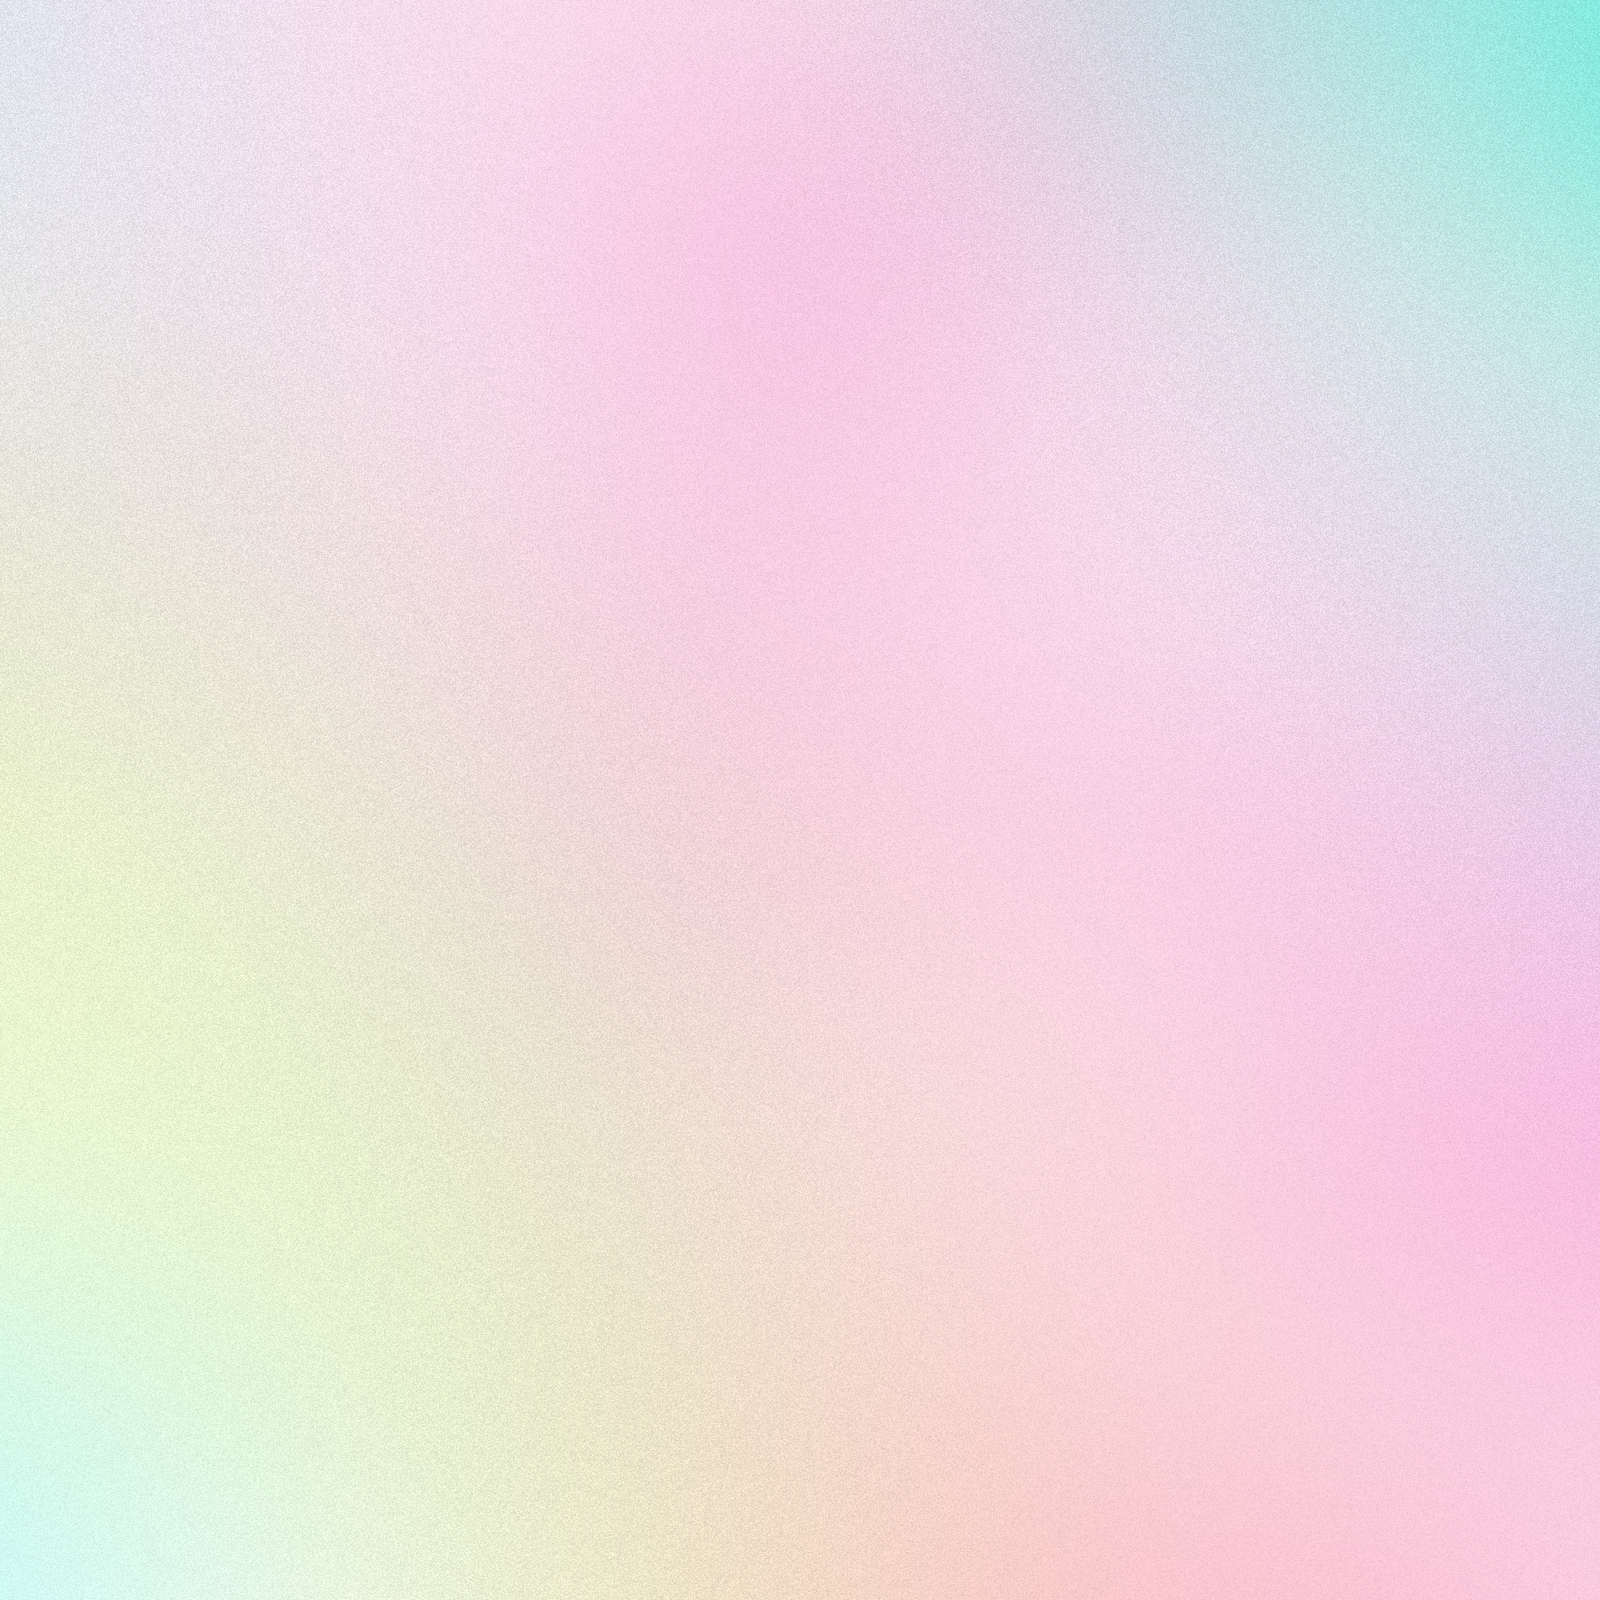 Abstract Pastel Soft Colorful Textured Background Toned